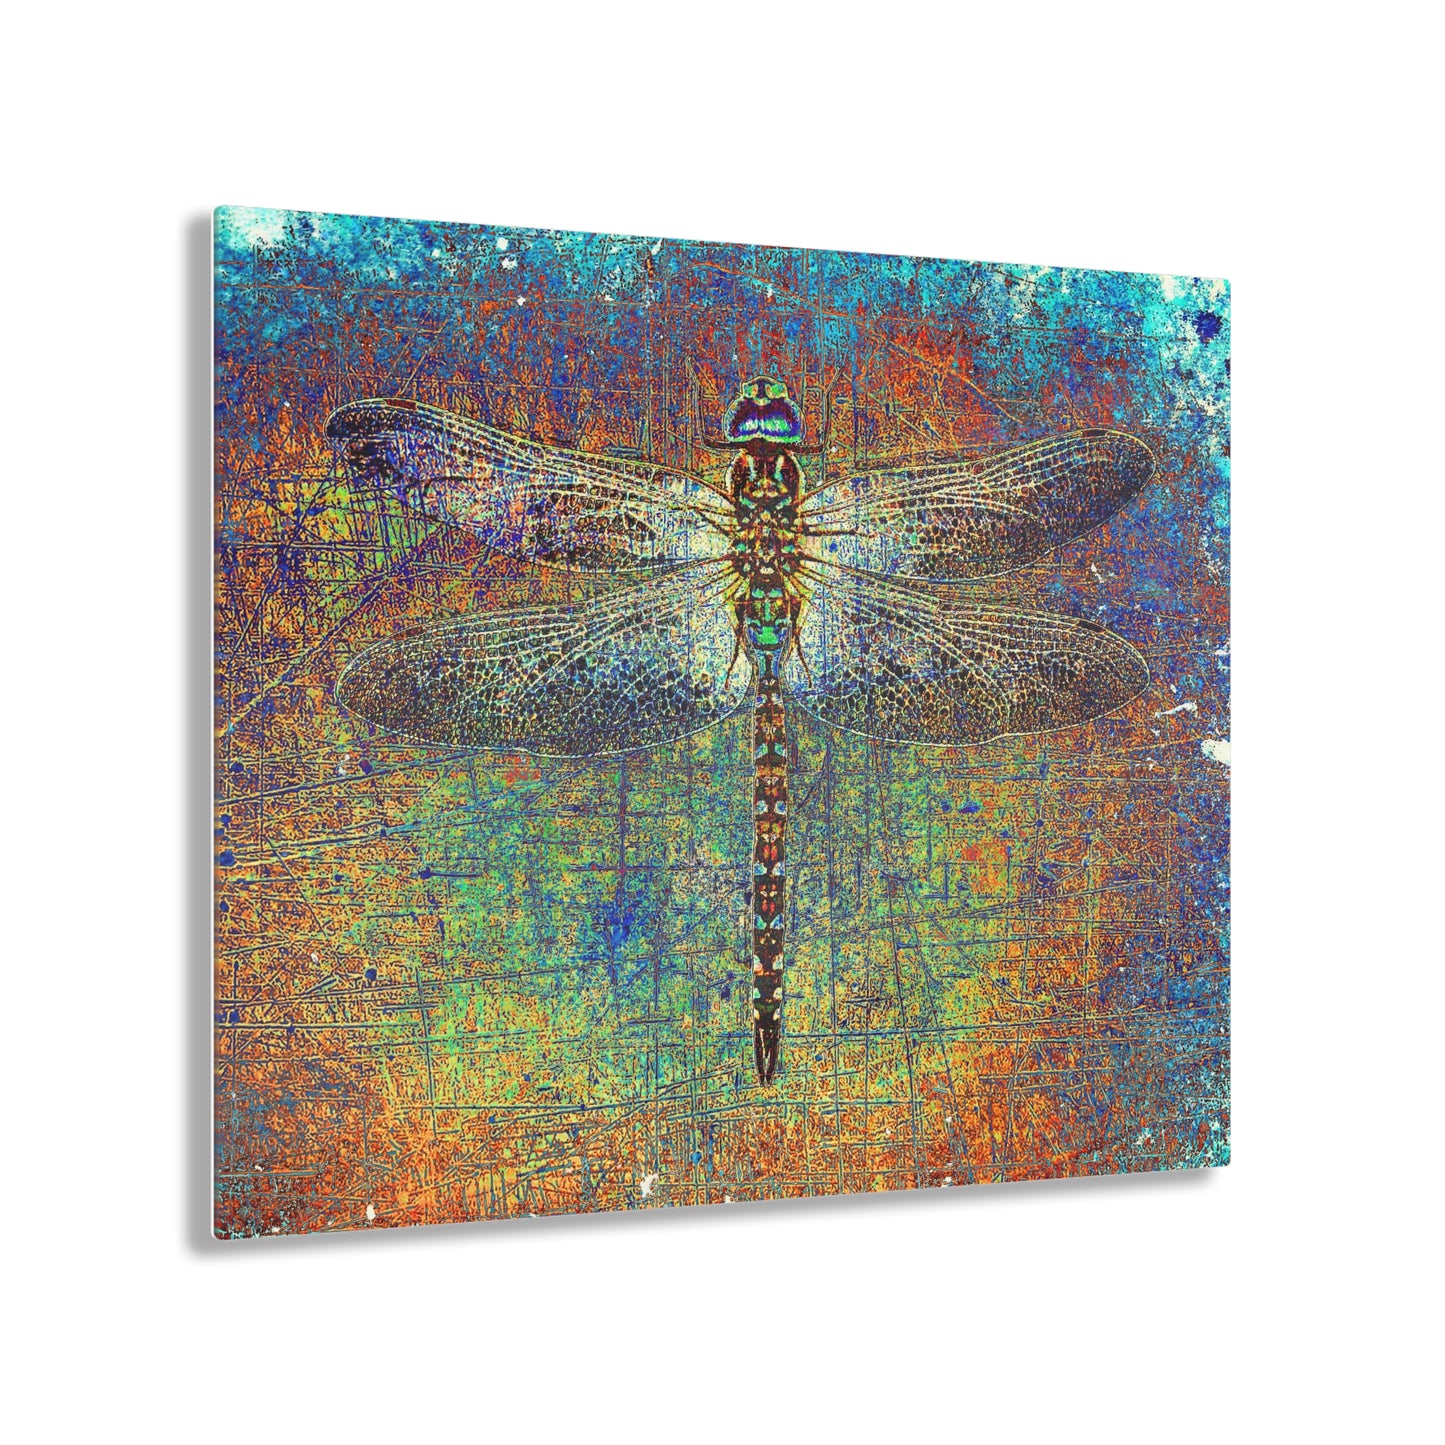 Dragonfly Themed Plexiglass Wall Art - Dragonfly on Multicolor Background Printed on a Crystal Clear Acrylic Panel